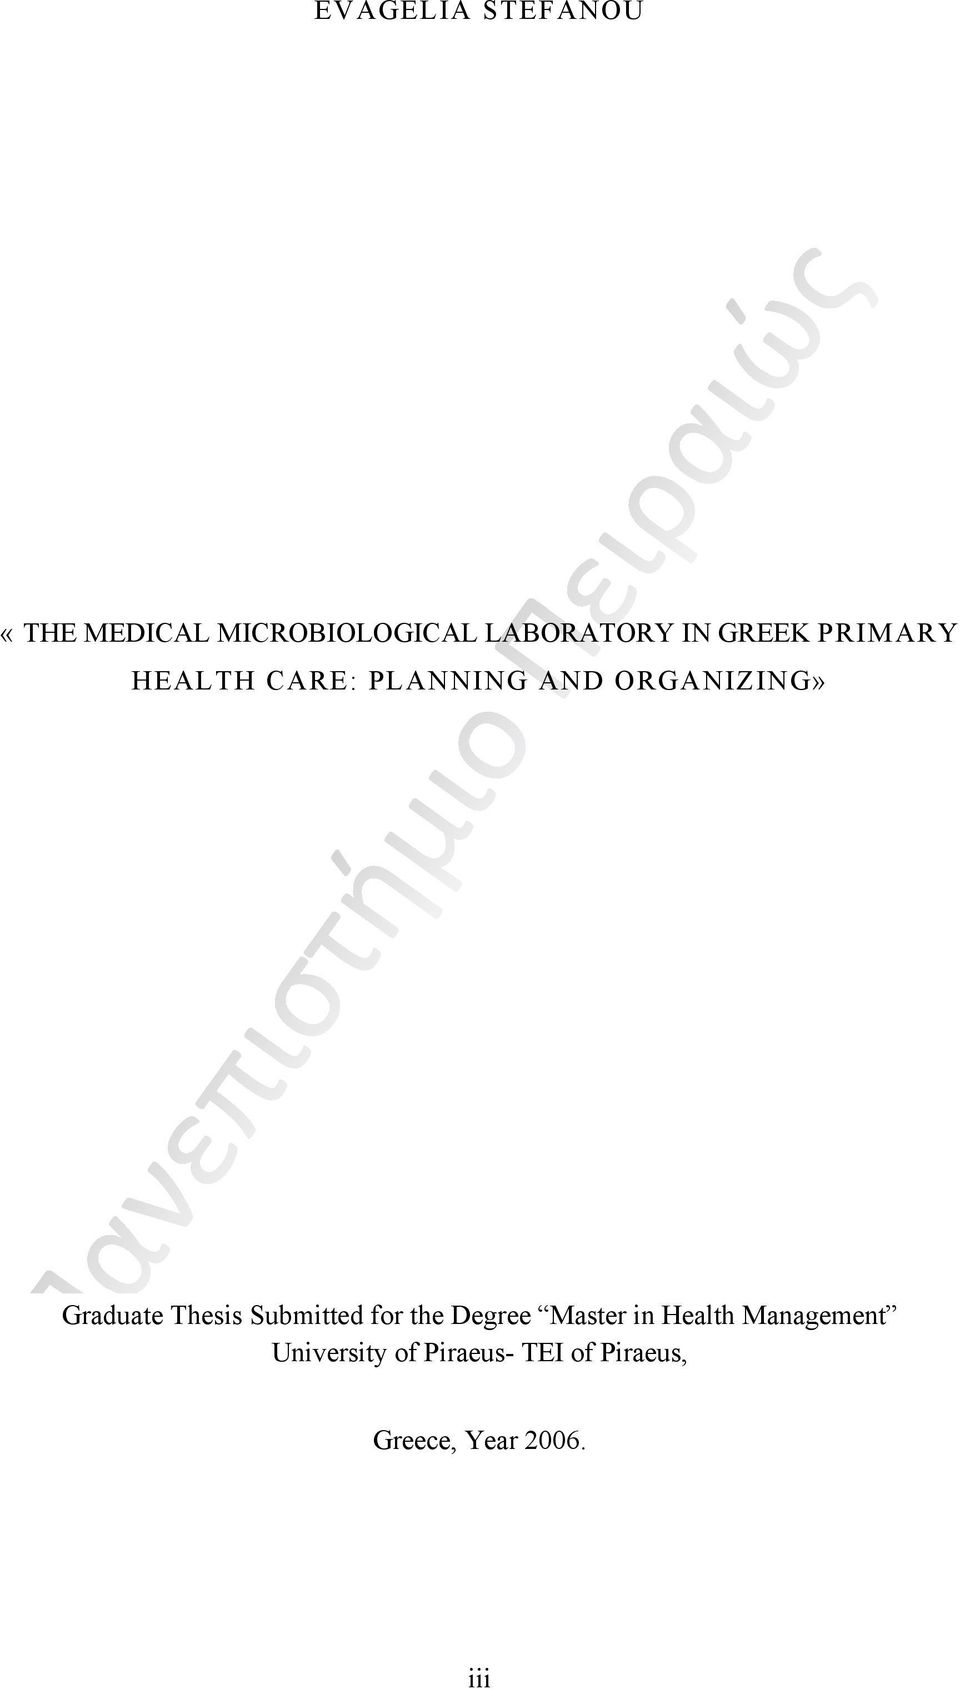 Thesis Submitted for the Degree Master in Health Management